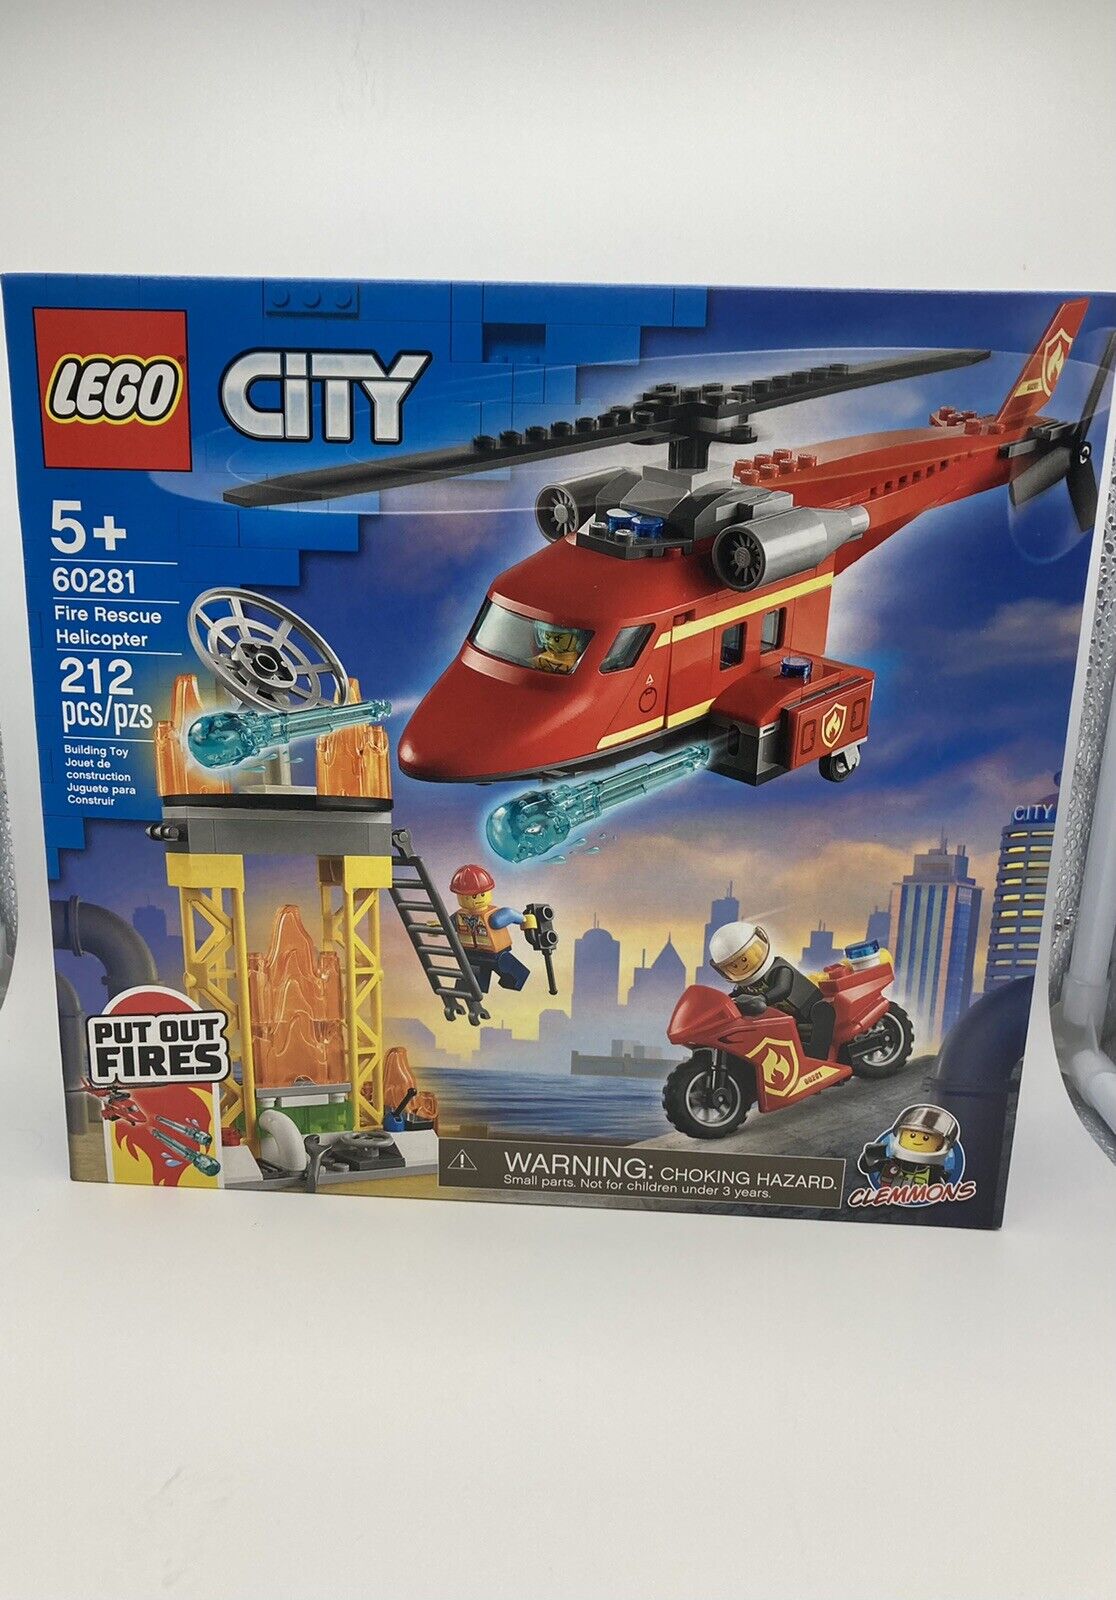 LEGO City Fire Rescue Helicopter 60281 Building Kit (212 Pieces)